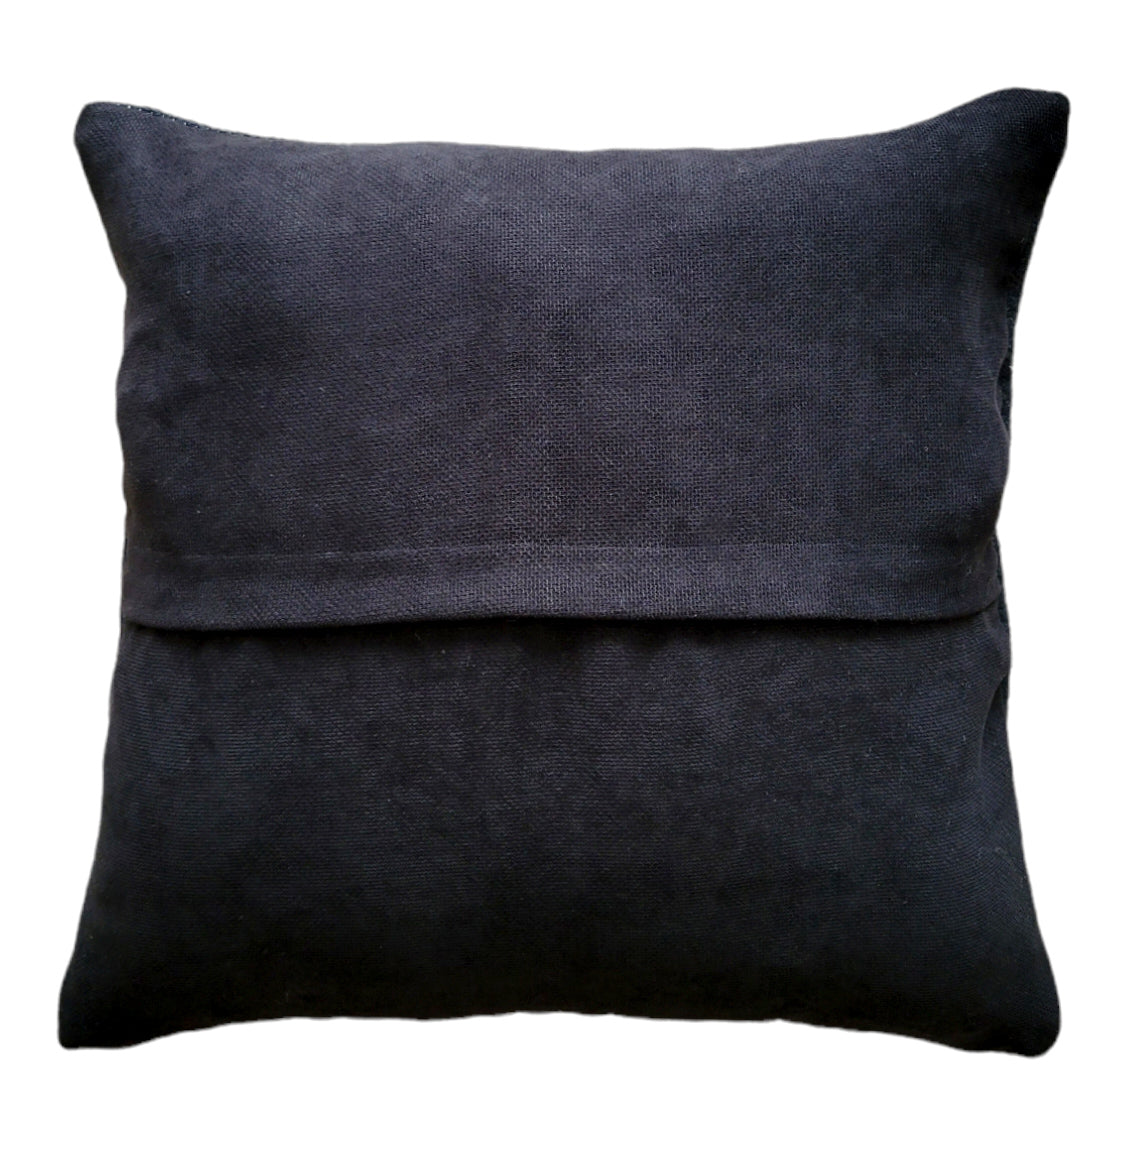 Black Cleo Handwoven Cotton Decorative Throw Pillow Cover